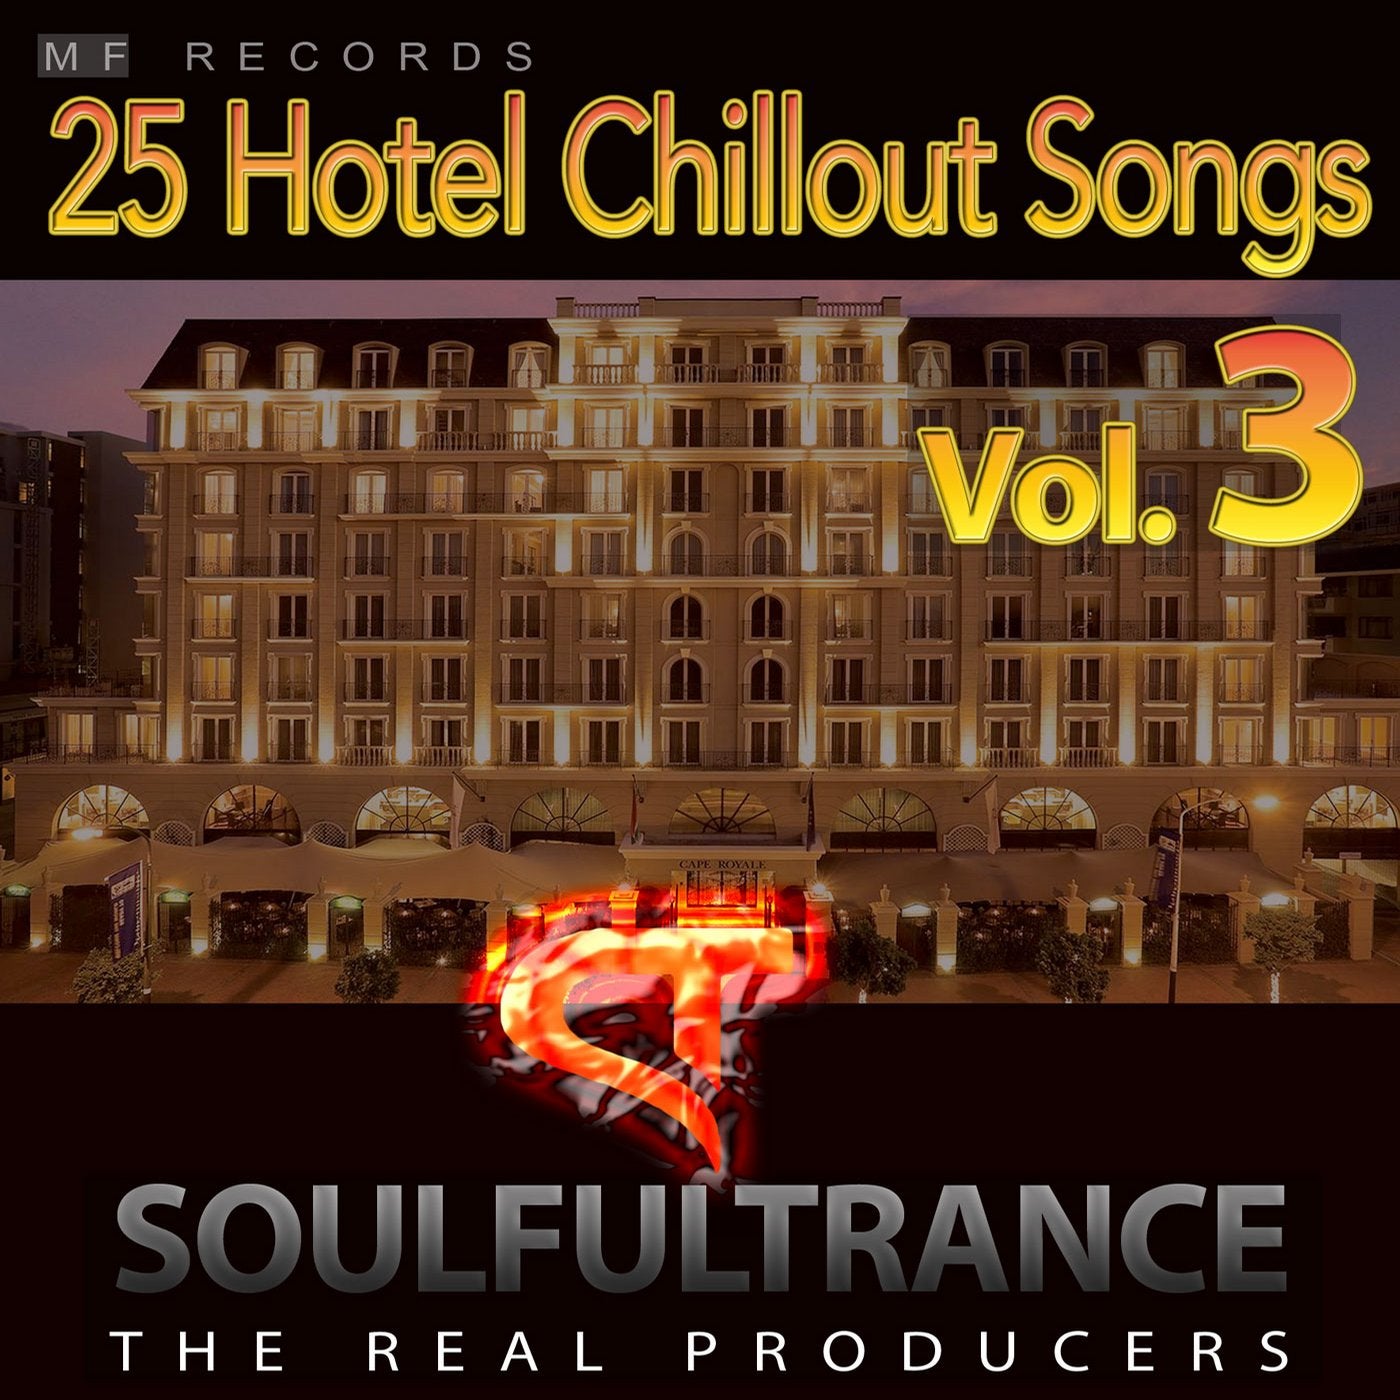 25 Hotel Chillout Songs, Vol. 3